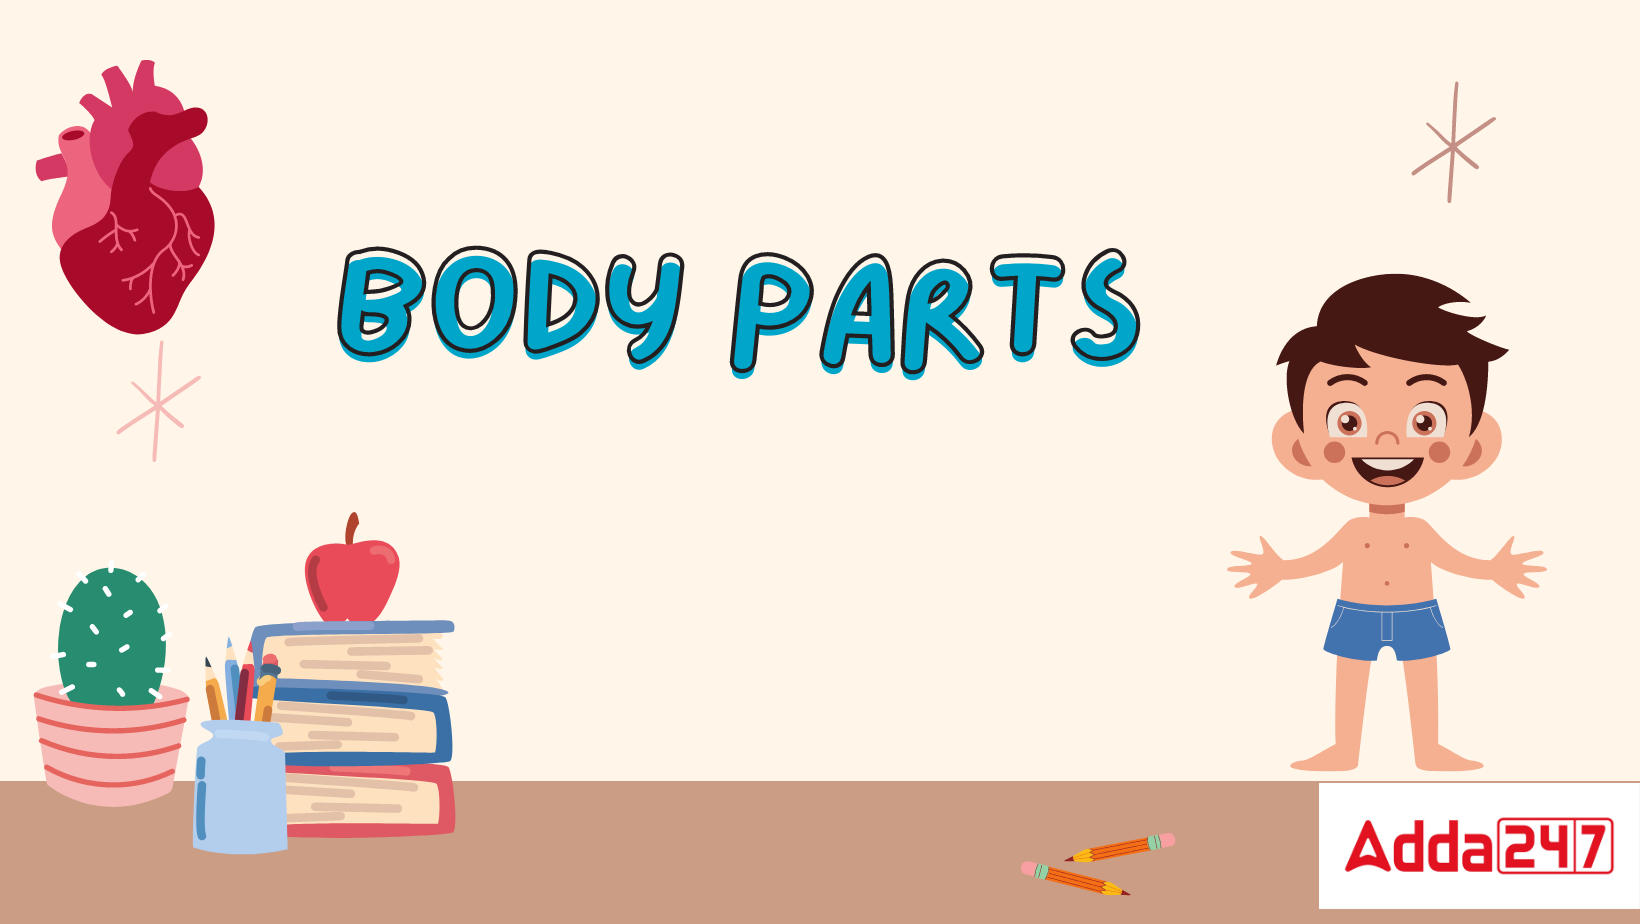 Body Parts Name With Pictures in English & Hindi PDF